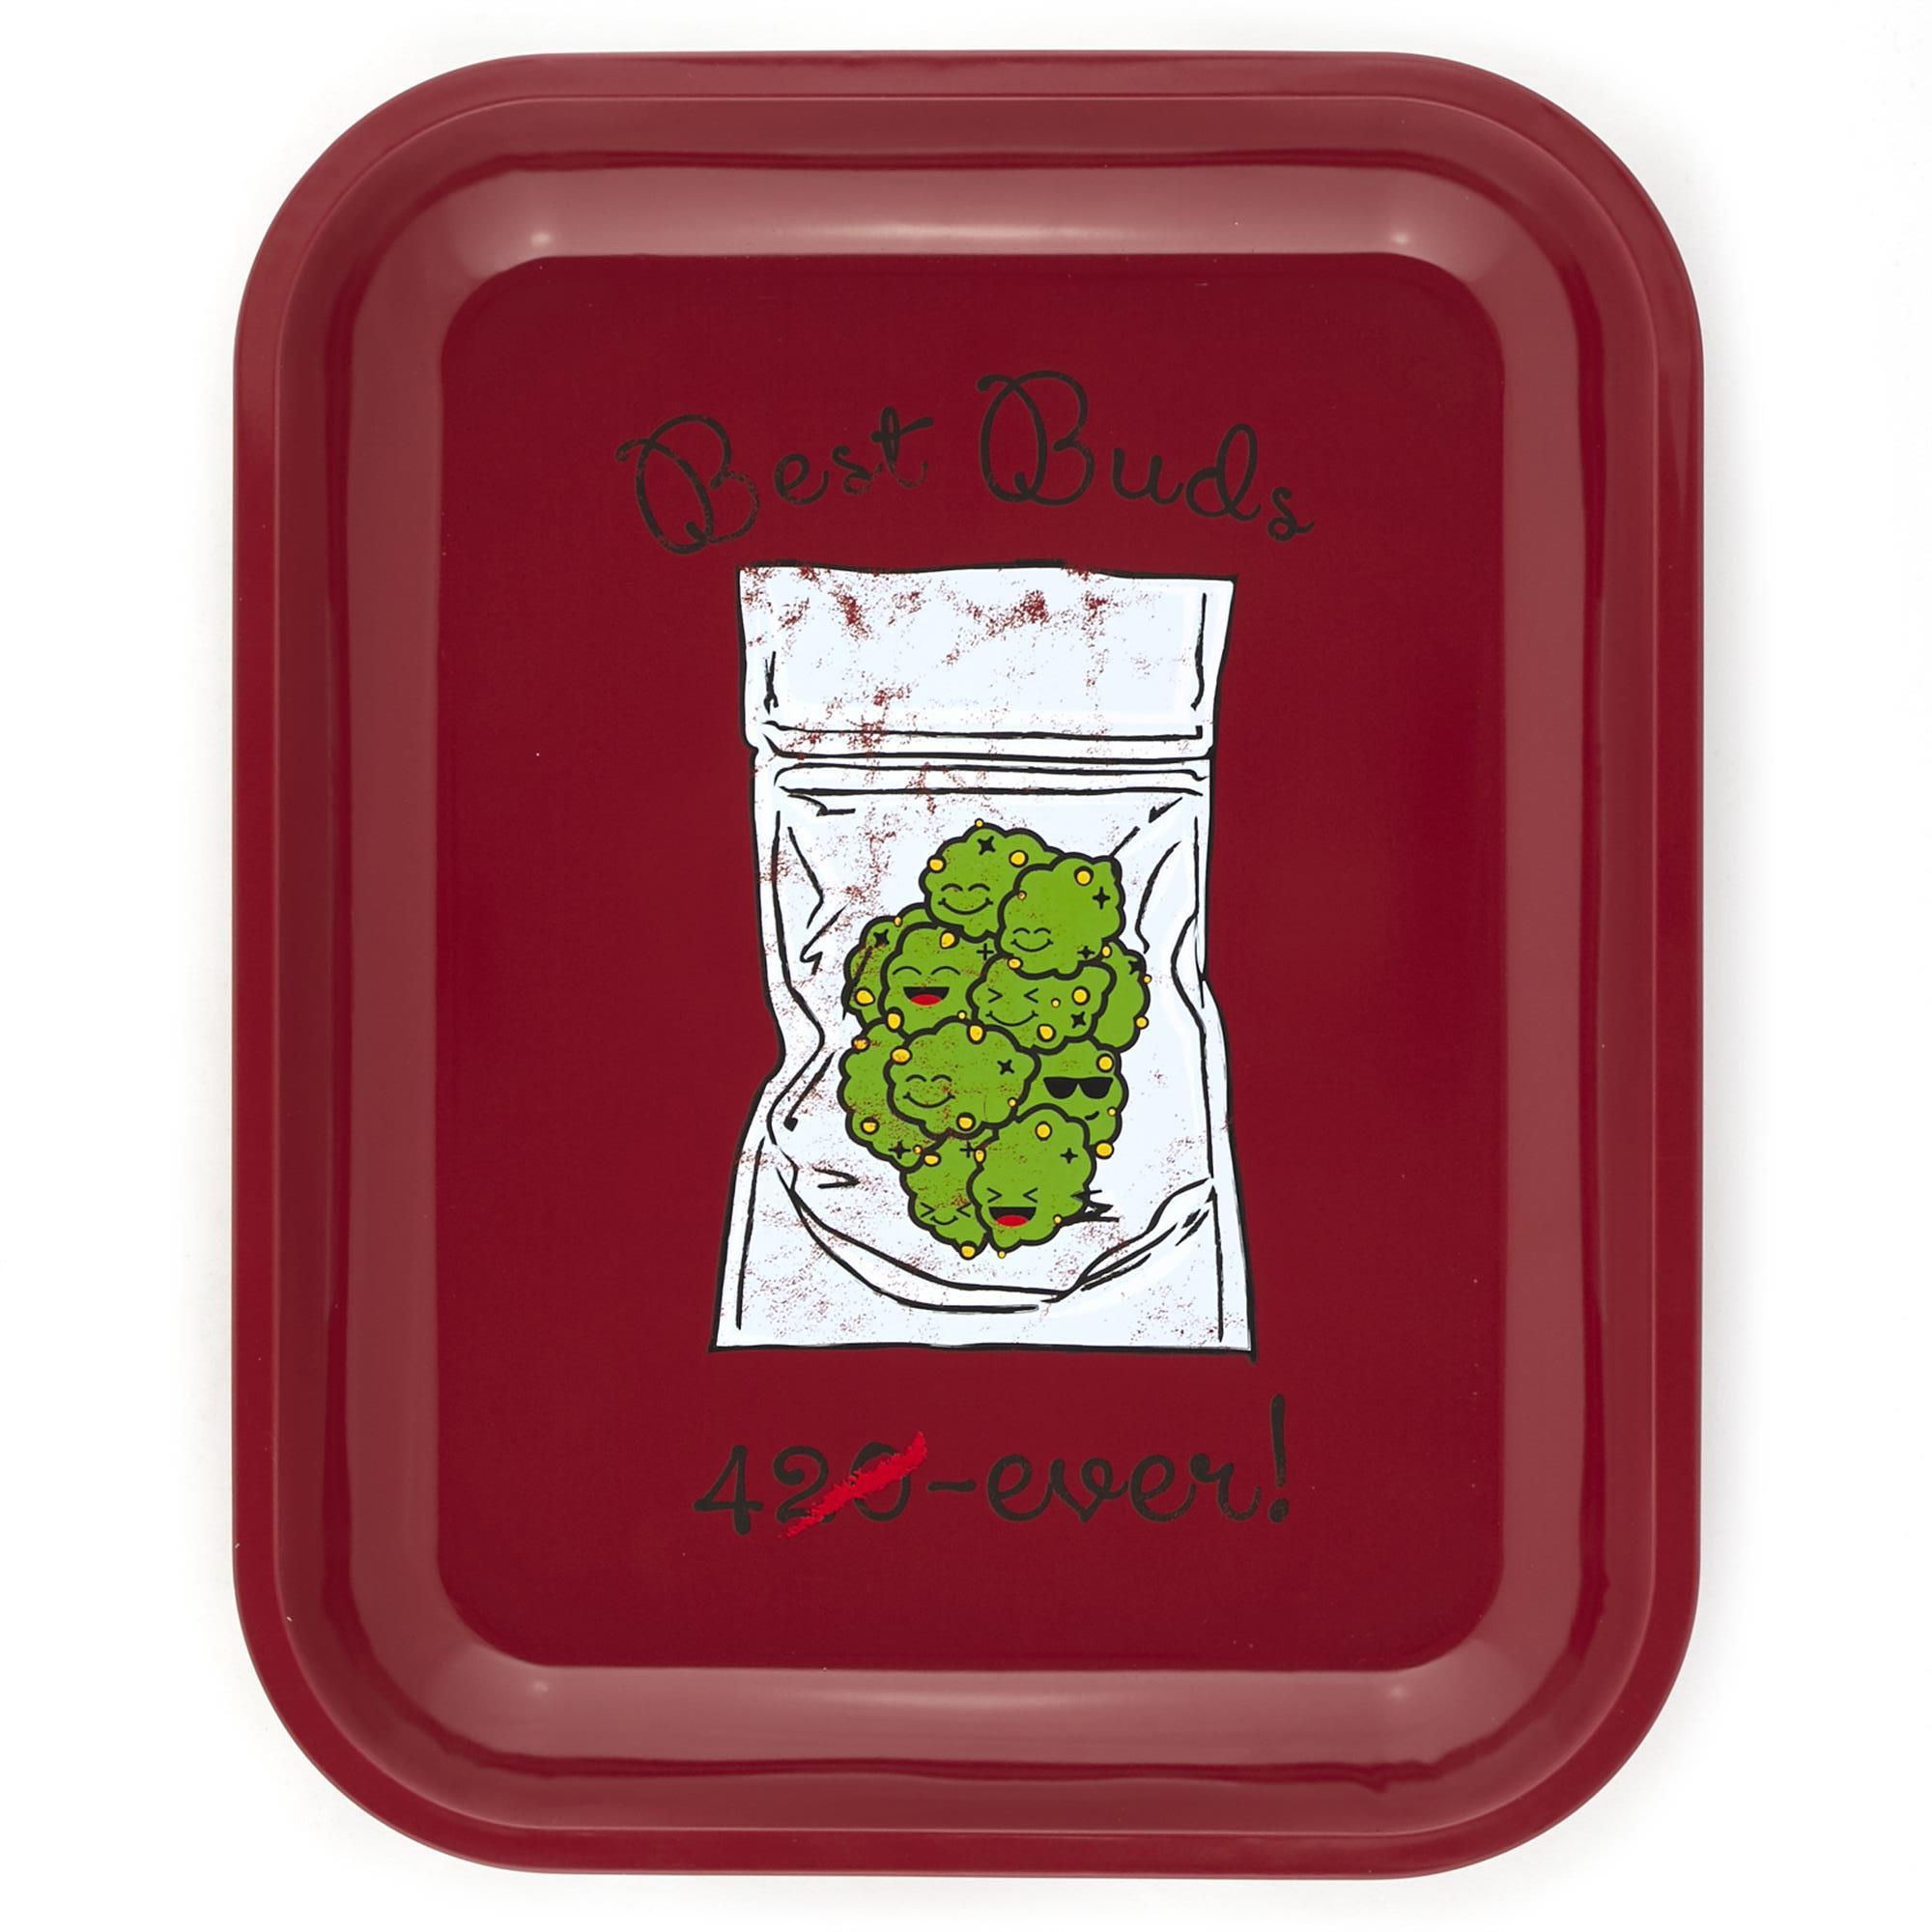 BEST BUDS 4 EVER TRAY